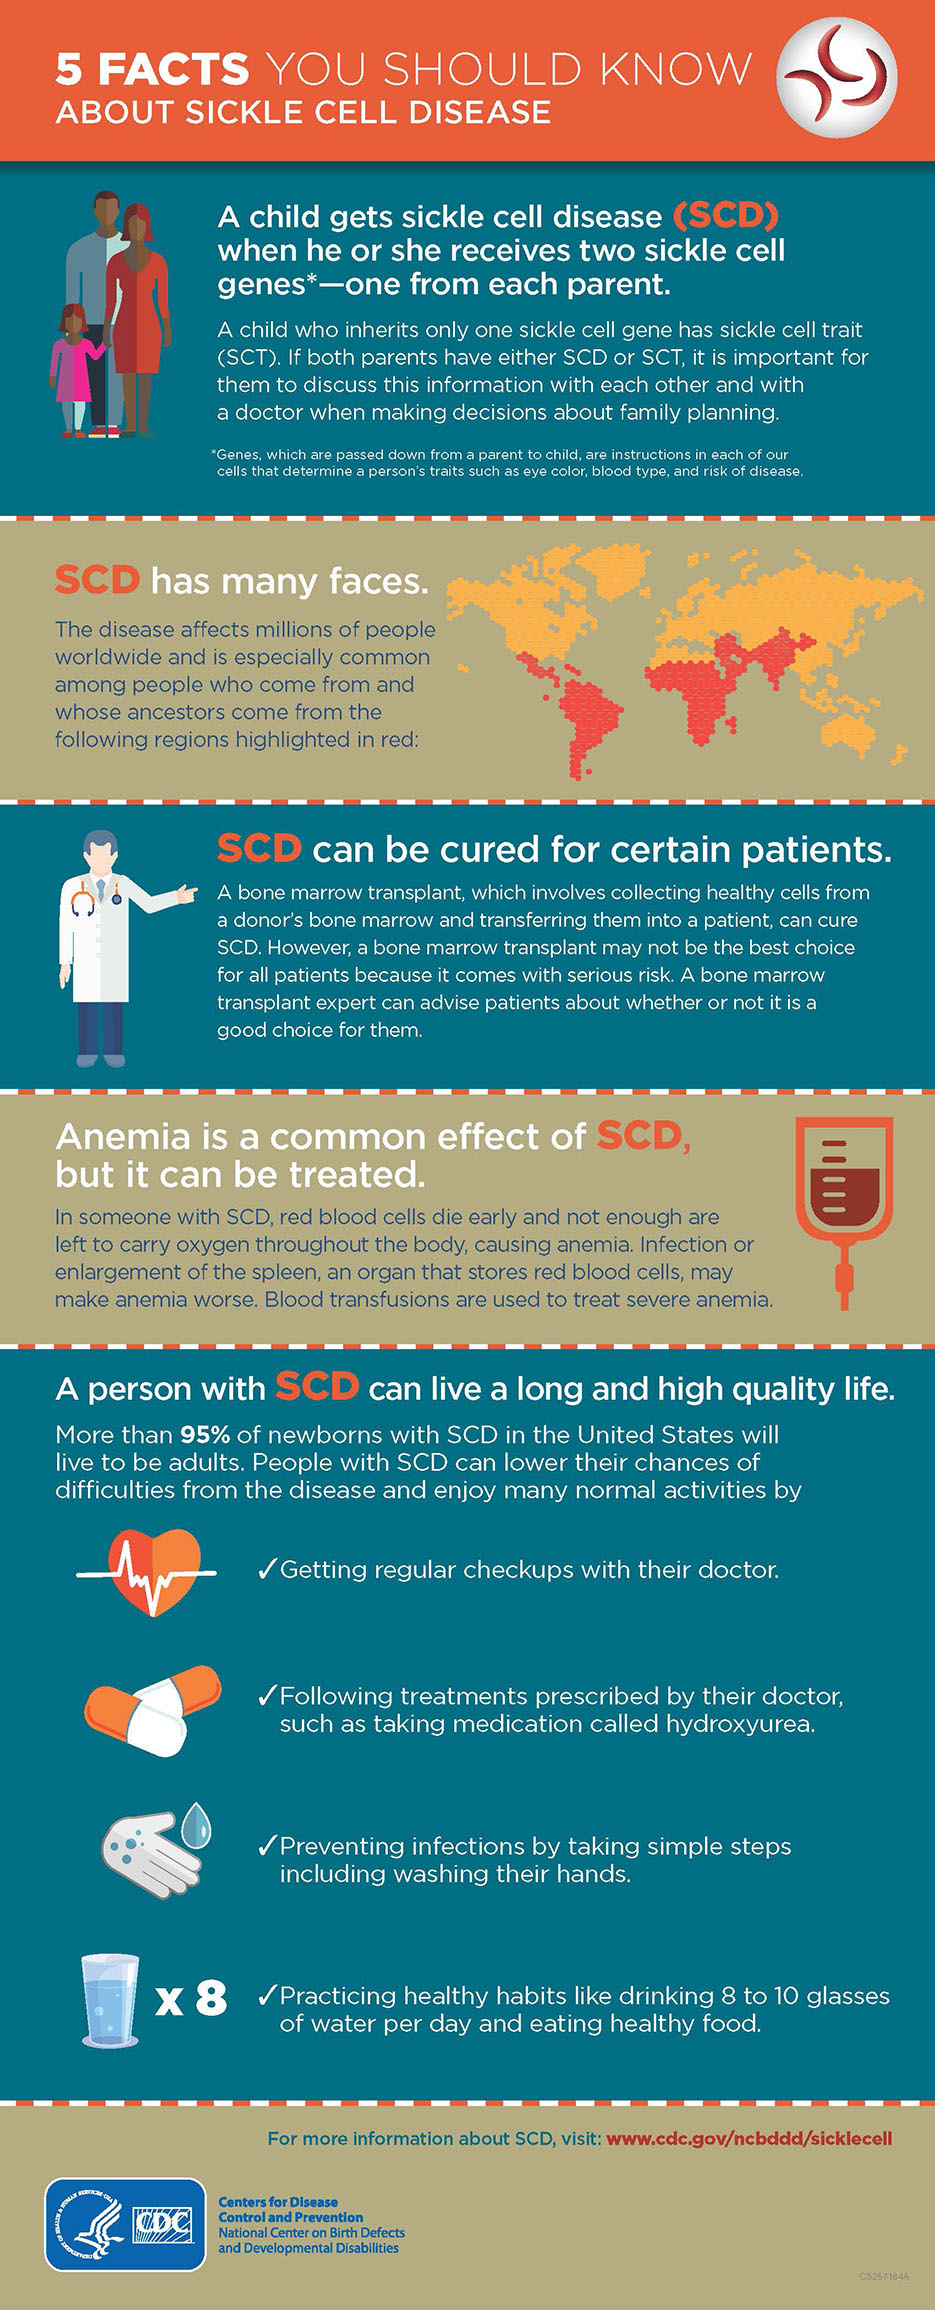 Infographic: 5 facts you should know about sickle cell disease